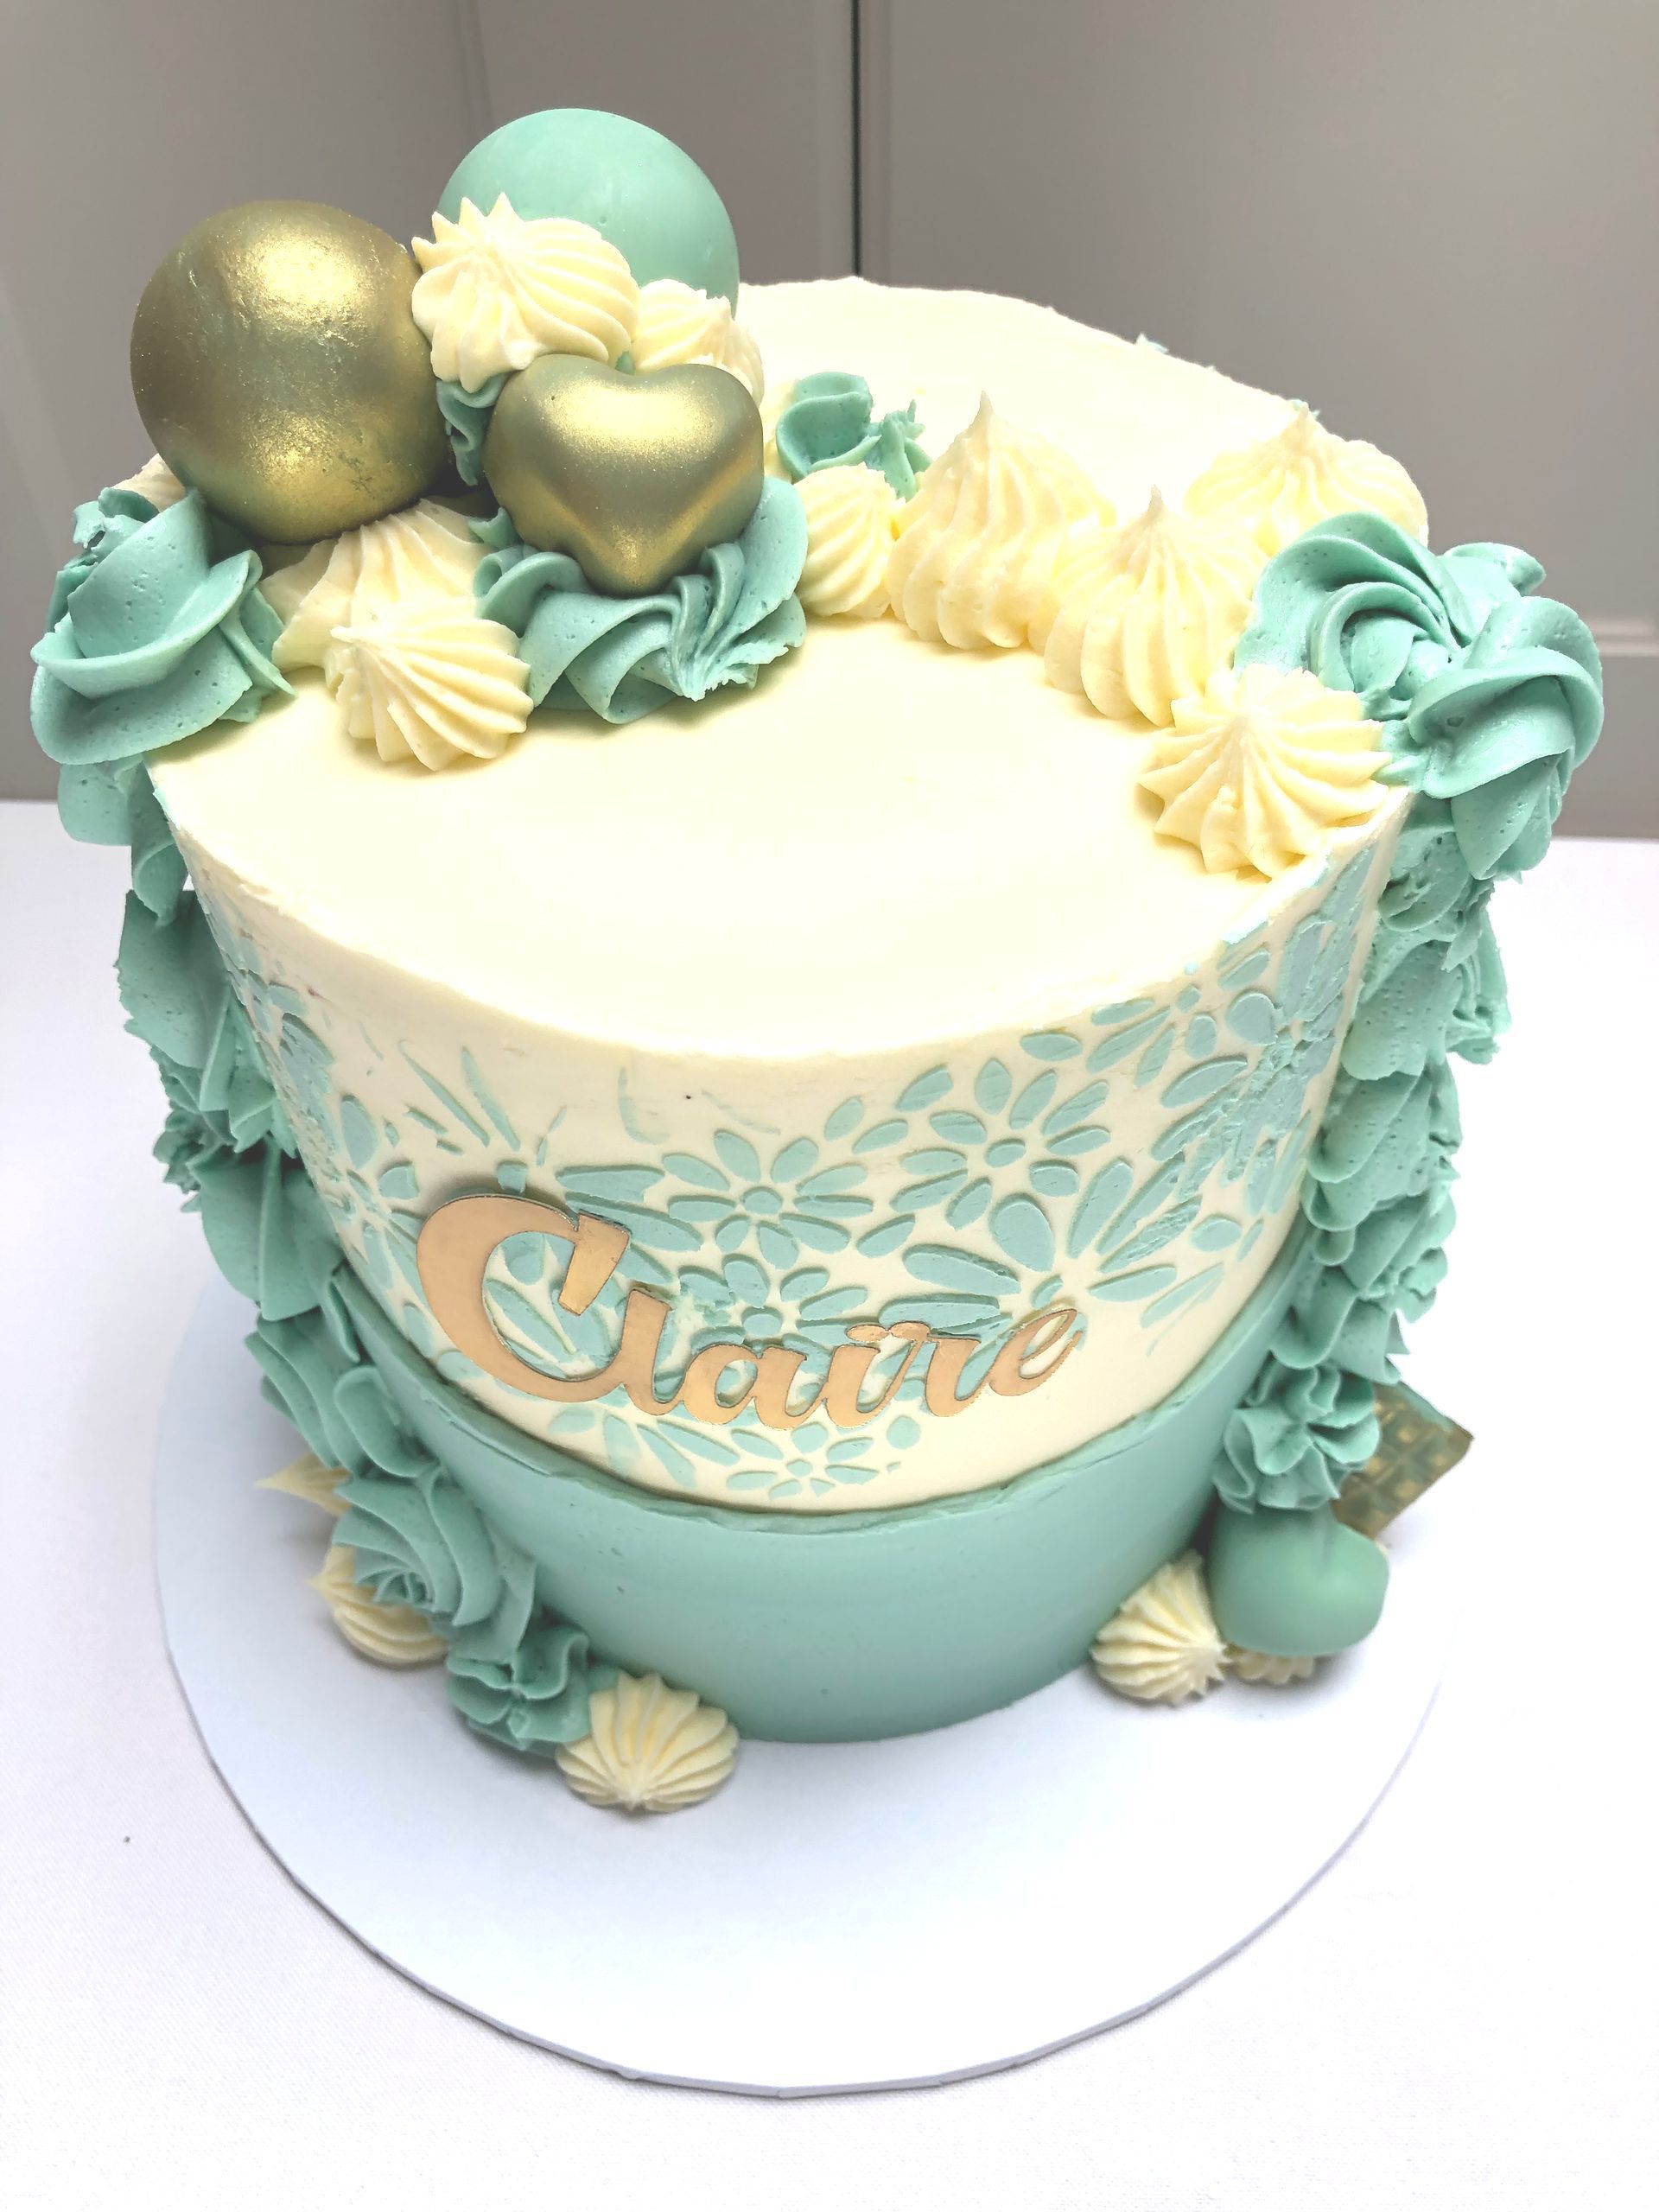 Ivory Buttercream covered cake with Tiffany blue buttercream stencil and piping work and a name in gold on the side of the cake.